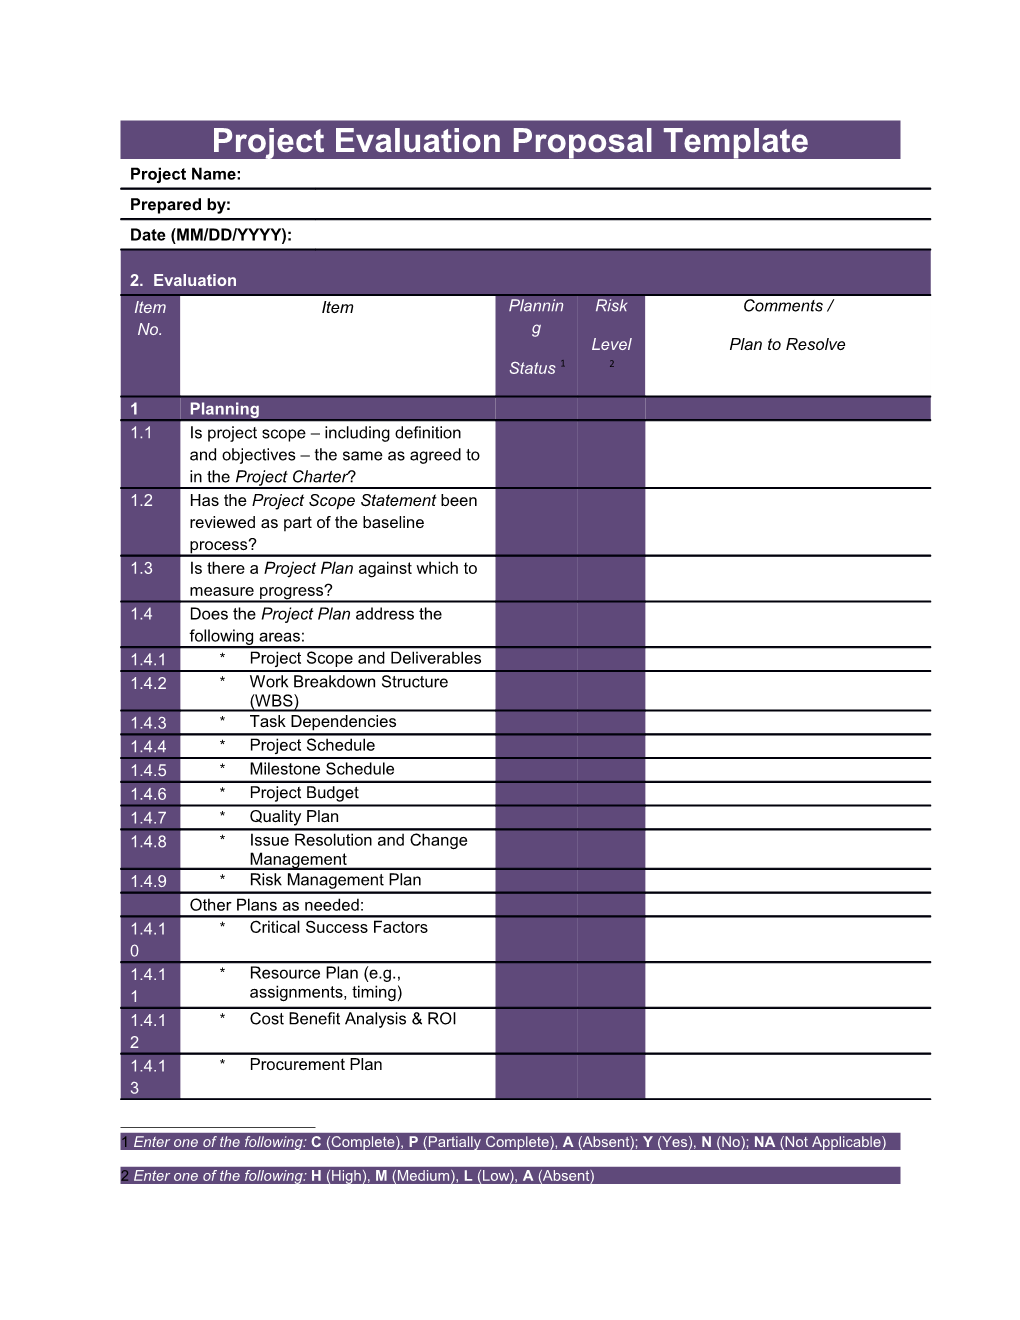 Project Evaluation Proposal Template